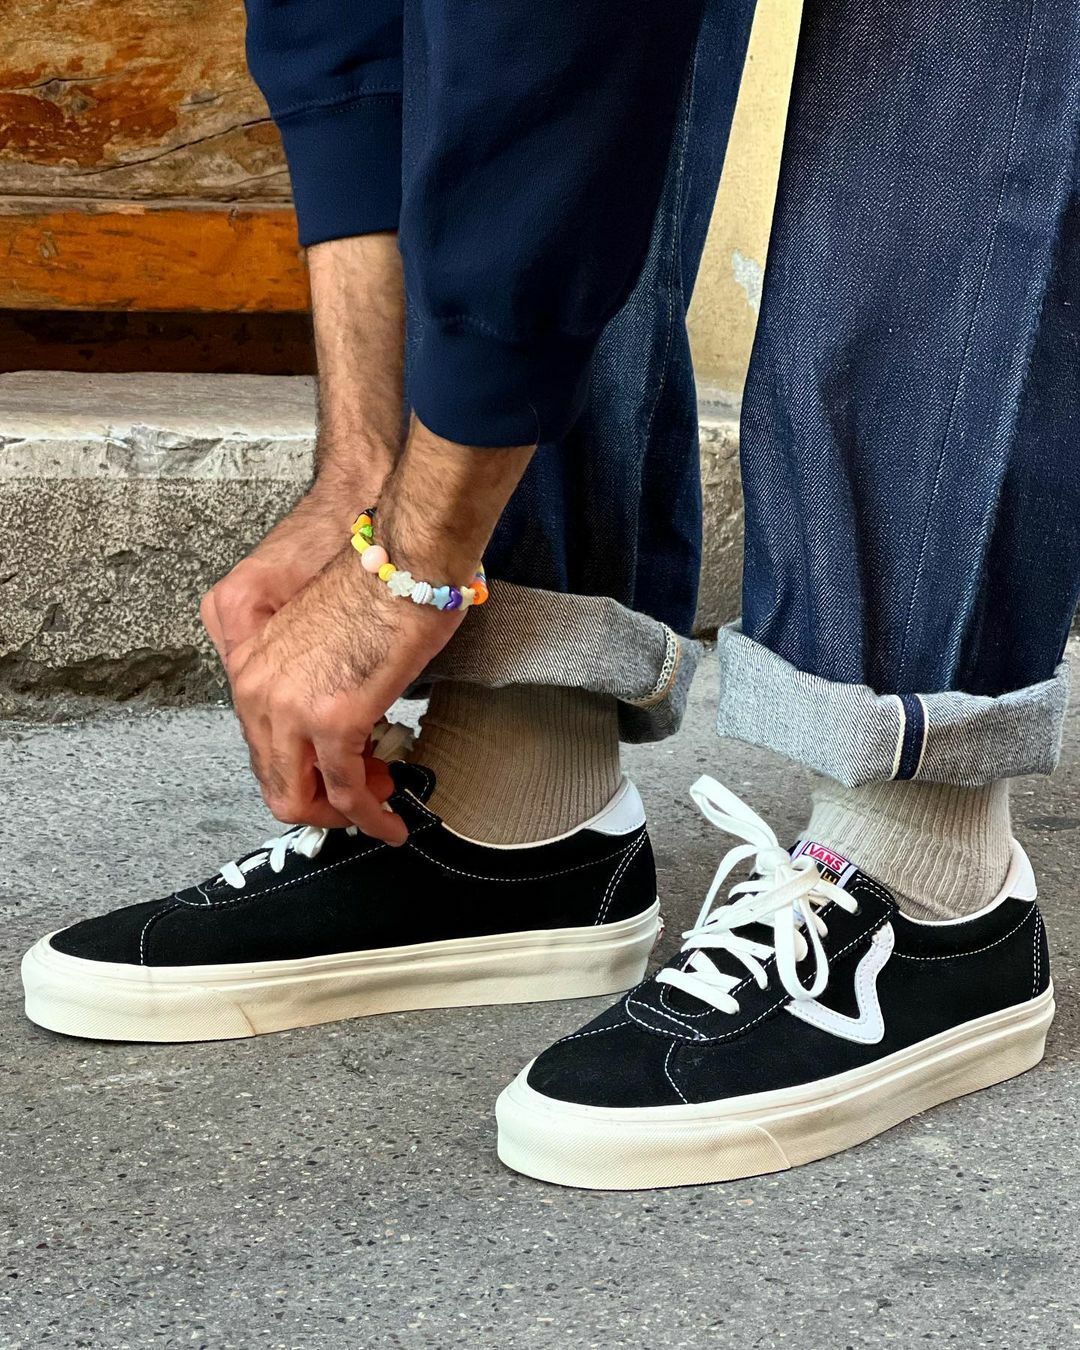 Vans Styles, Fit and History | Vans Buyers Guide - AllSole